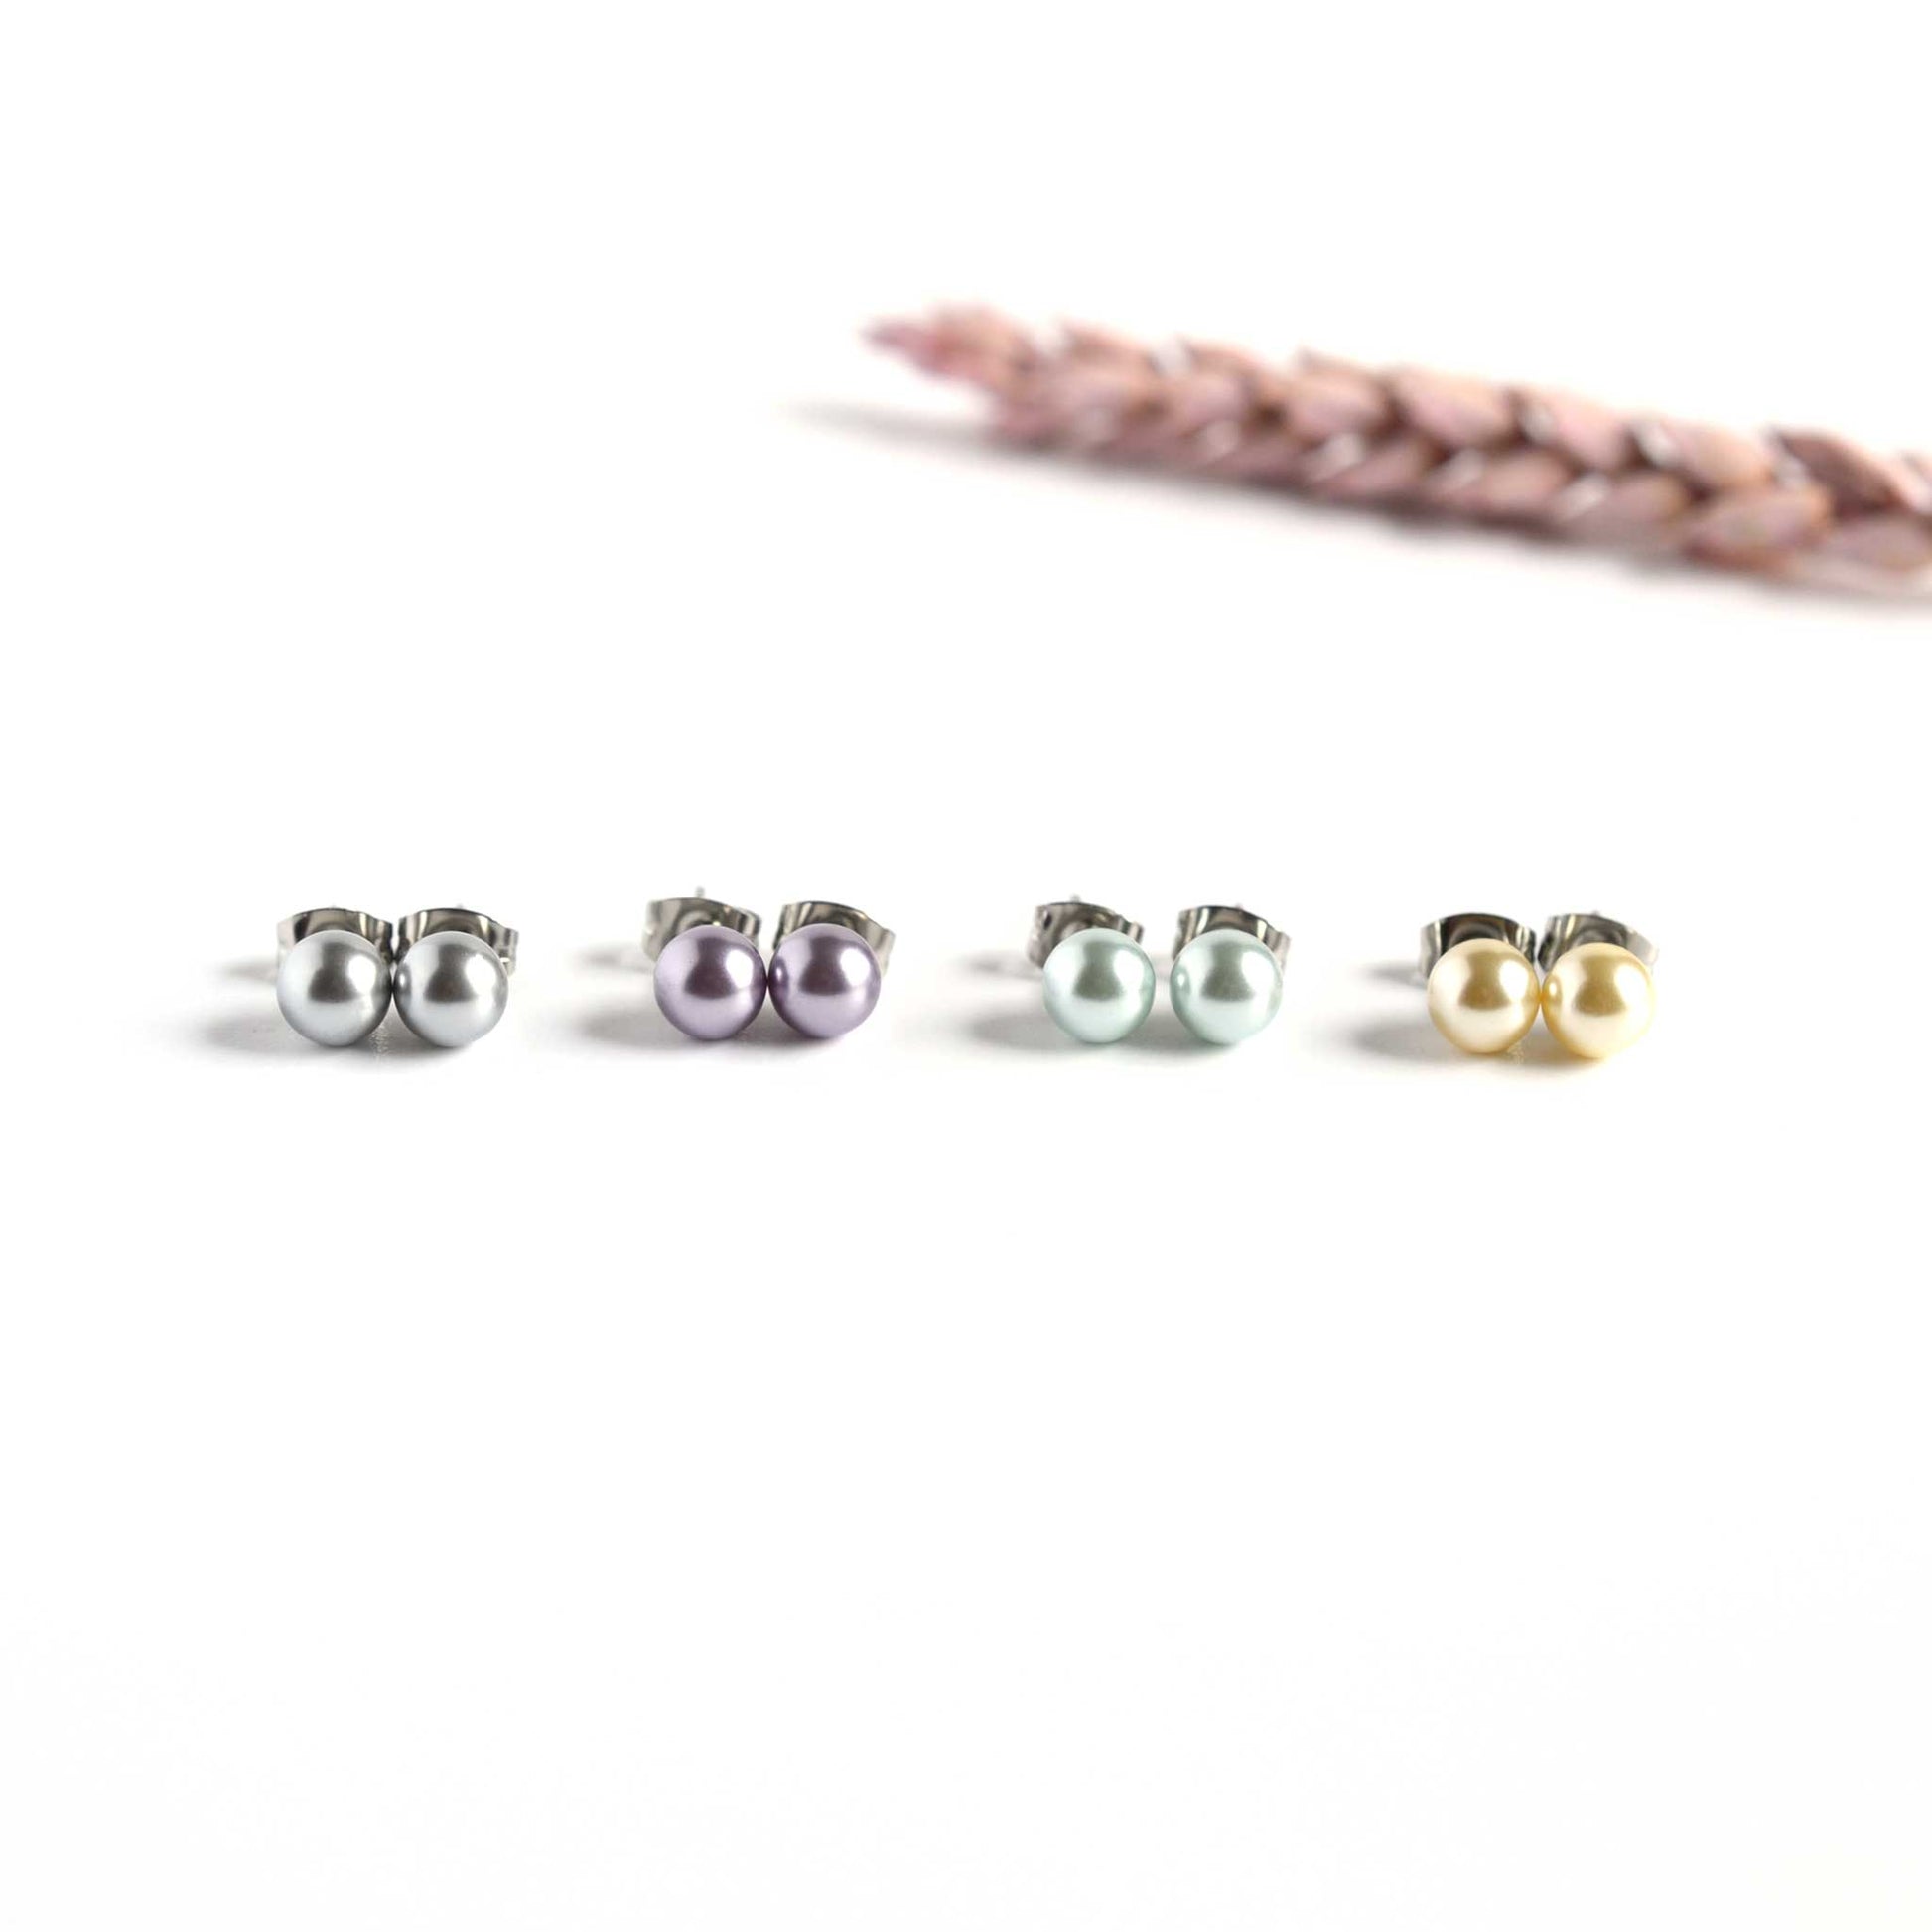 Four pairs of pastel coloured 6mm faux pearl stud earrings on white background